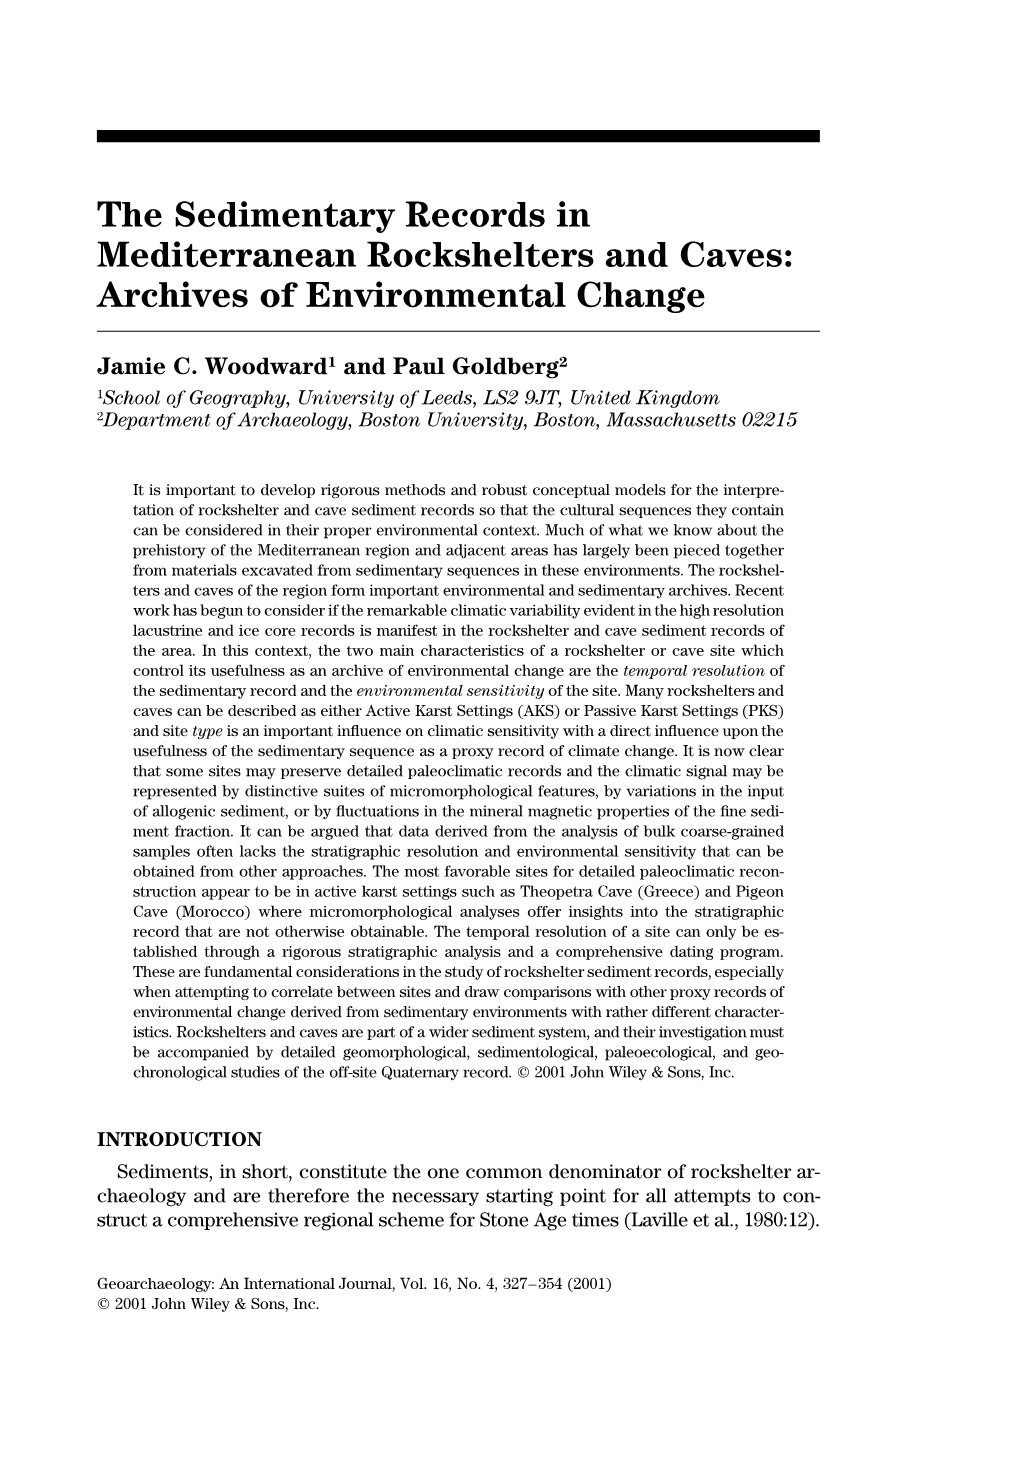 The Sedimentary Records in Mediterranean Rockshelters and Caves: Archives of Environmental Change